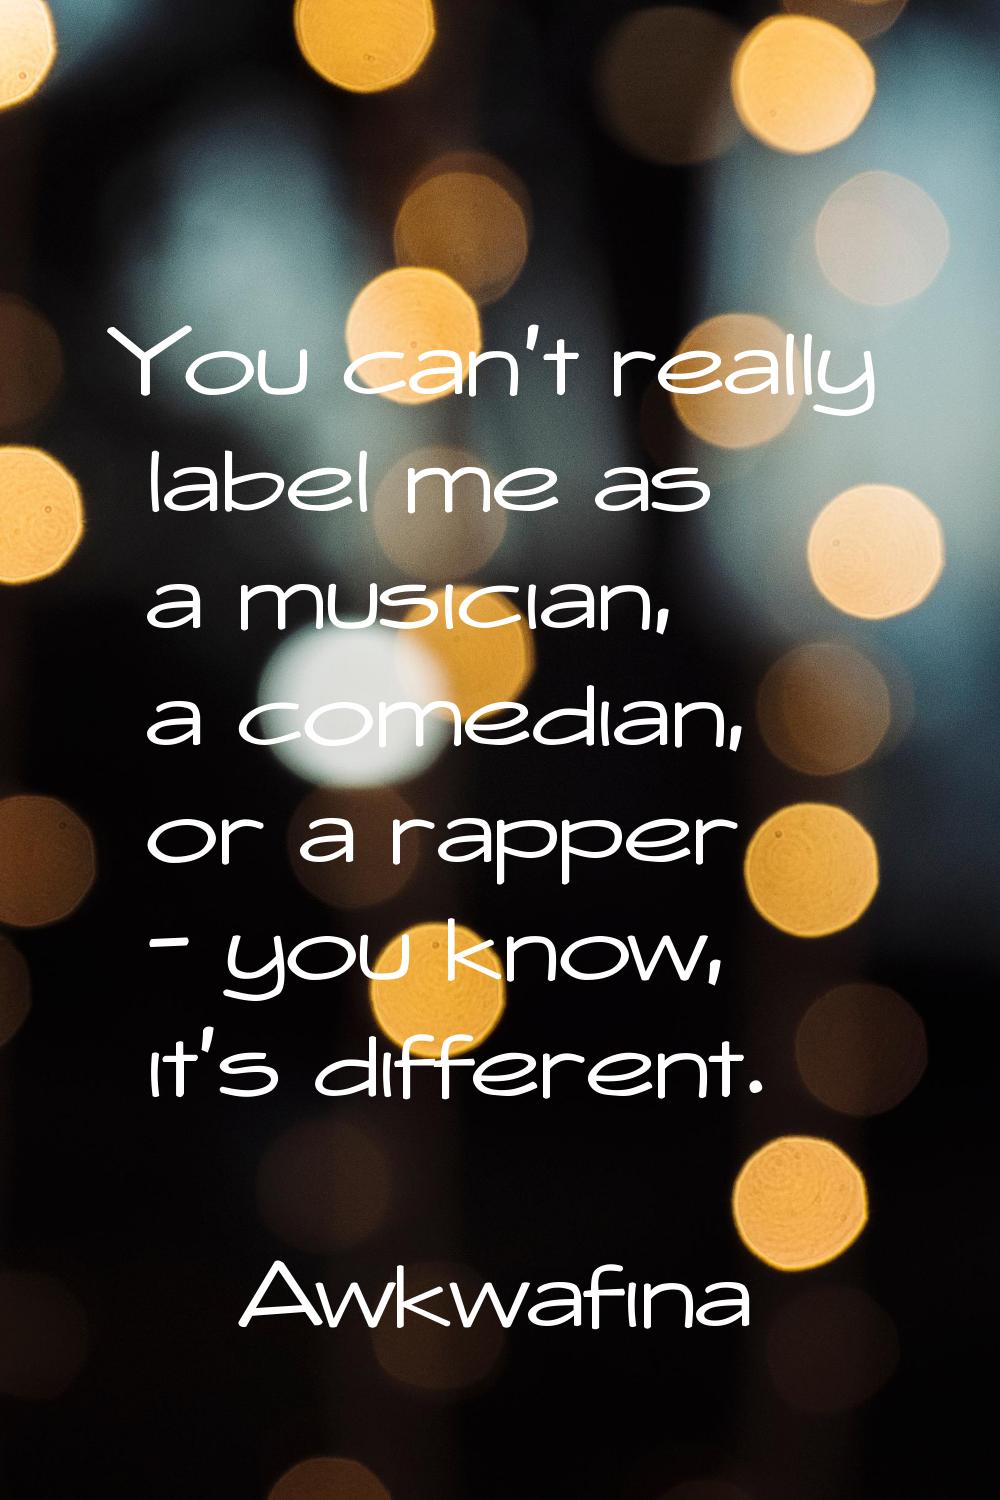 You can't really label me as a musician, a comedian, or a rapper - you know, it's different.